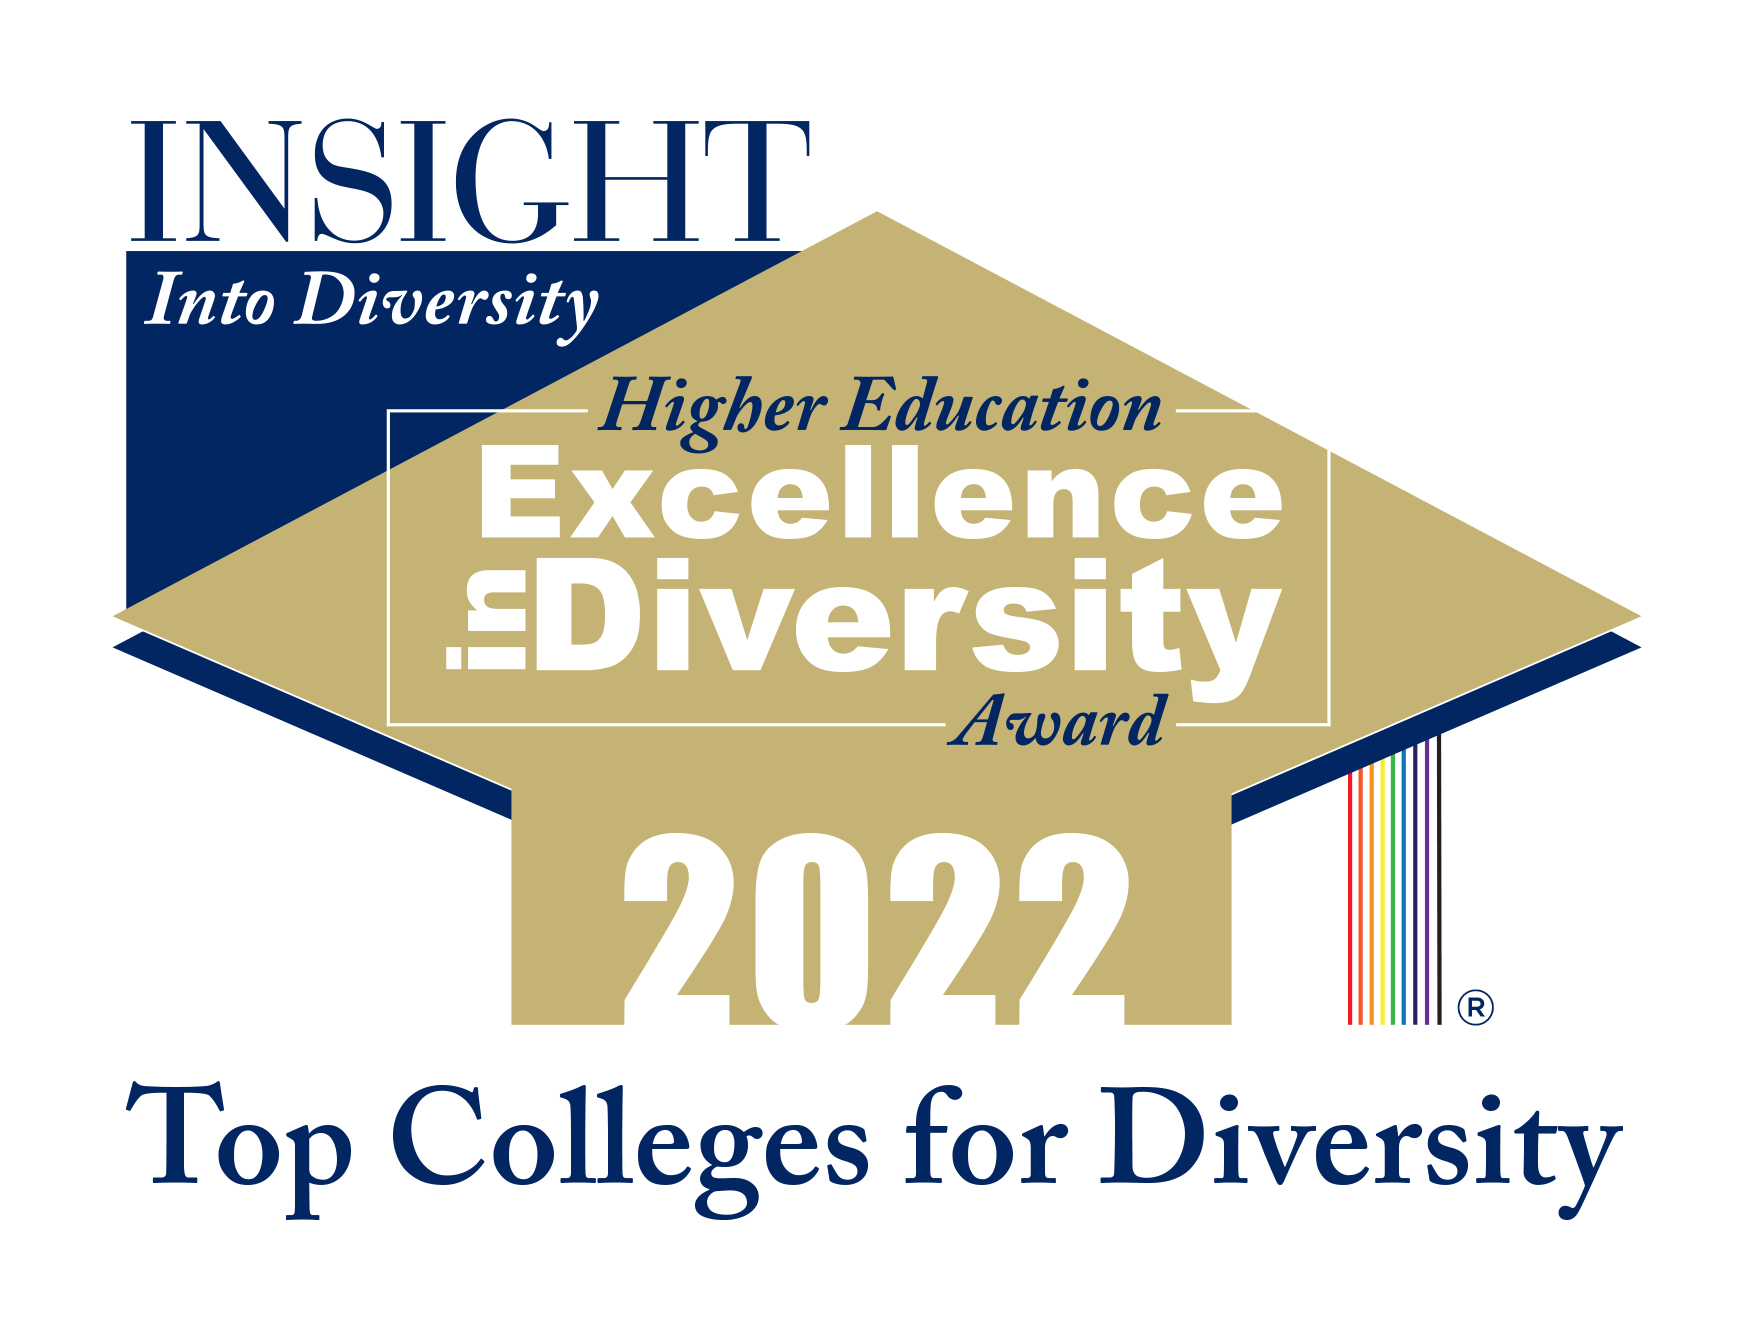 Insight Into Diversity, 2022 Higher Education Excellence in Diversity Award